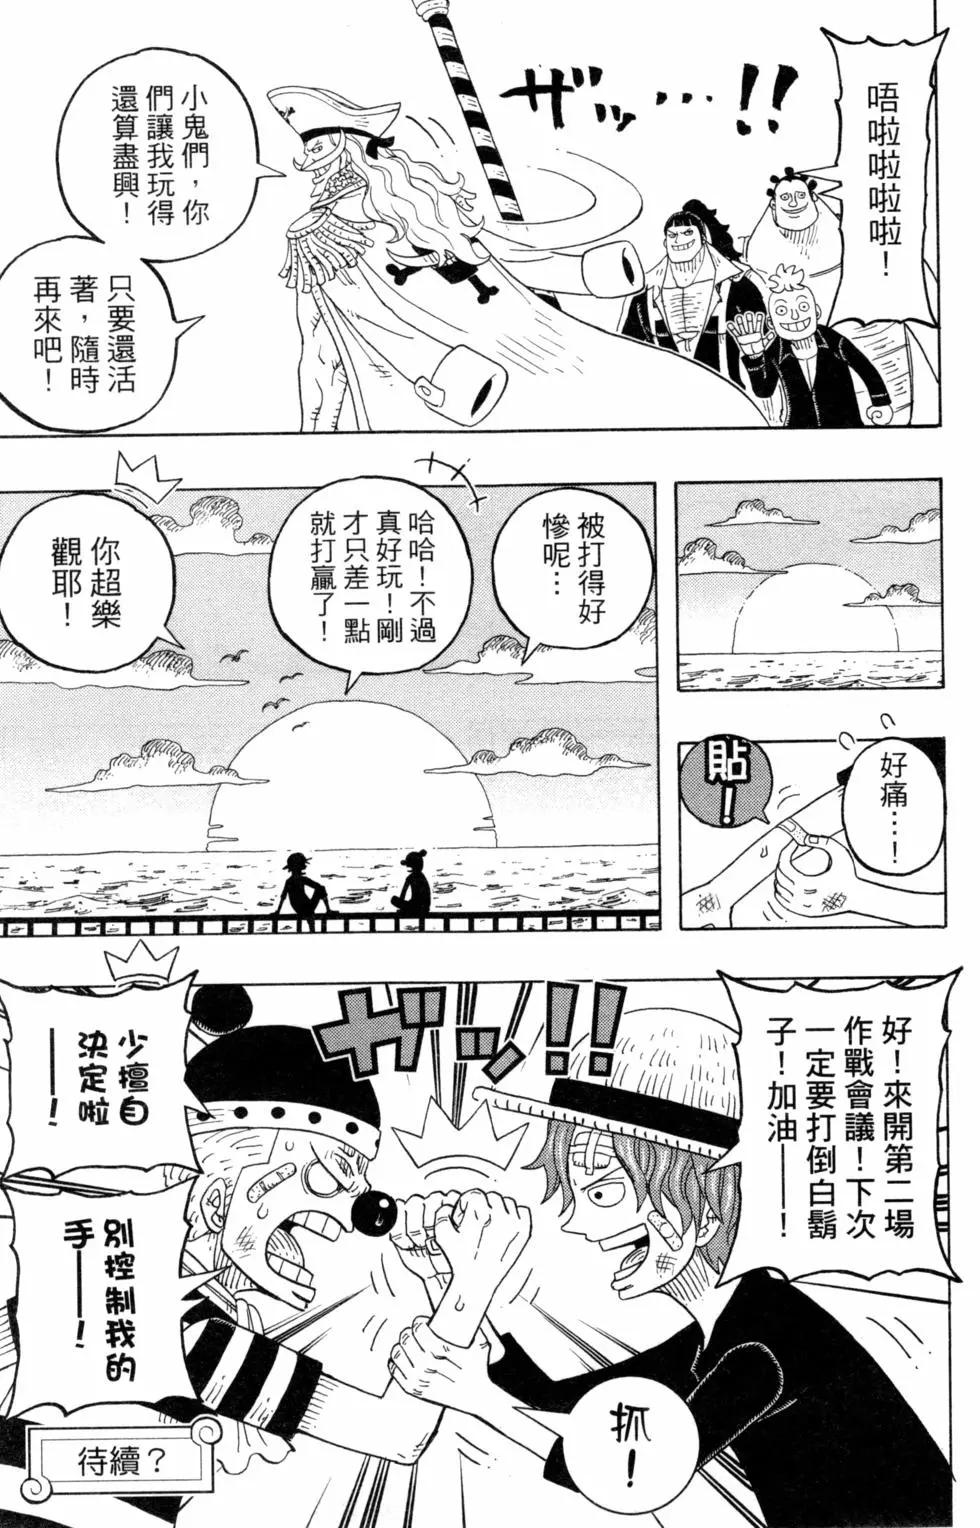 One piece party - 第06卷(1/4) - 6